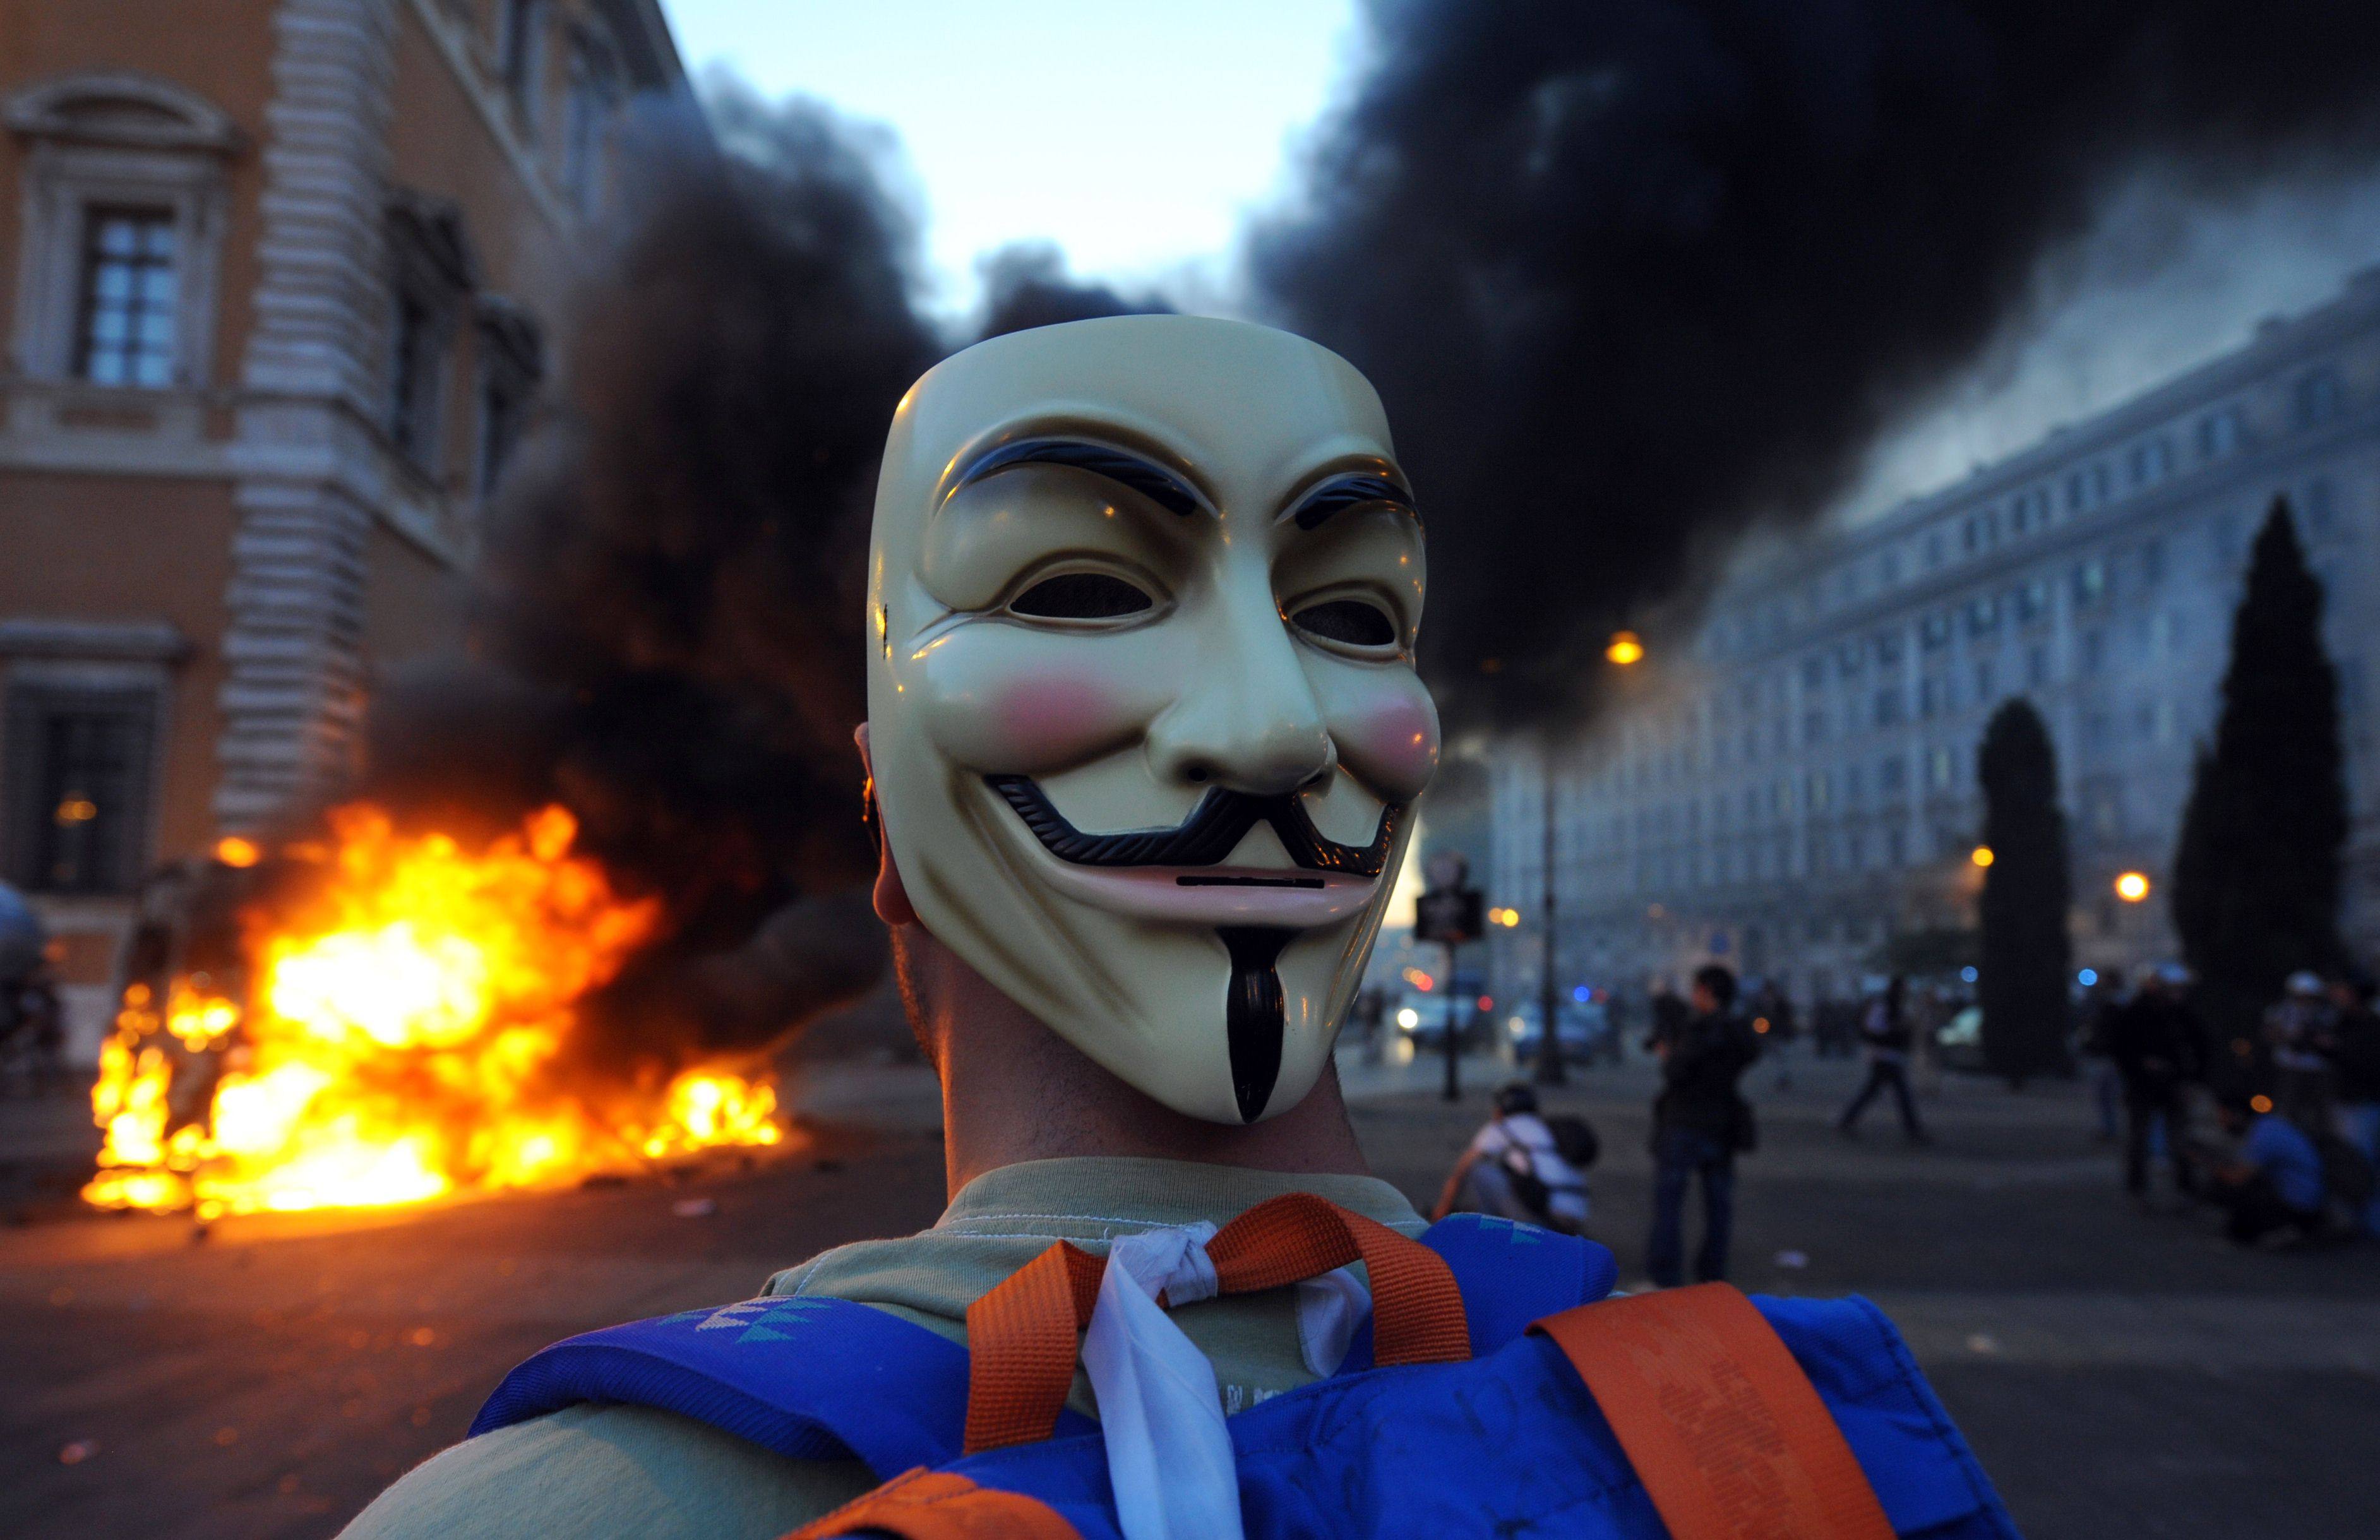 A masked protester at a protest in Rome on October 15, 2011, against the greed of bankers, in what was the worst violence of worldwide demonstrations against corporate greed in the aftermath of the global financial crisis. Photo: AFP